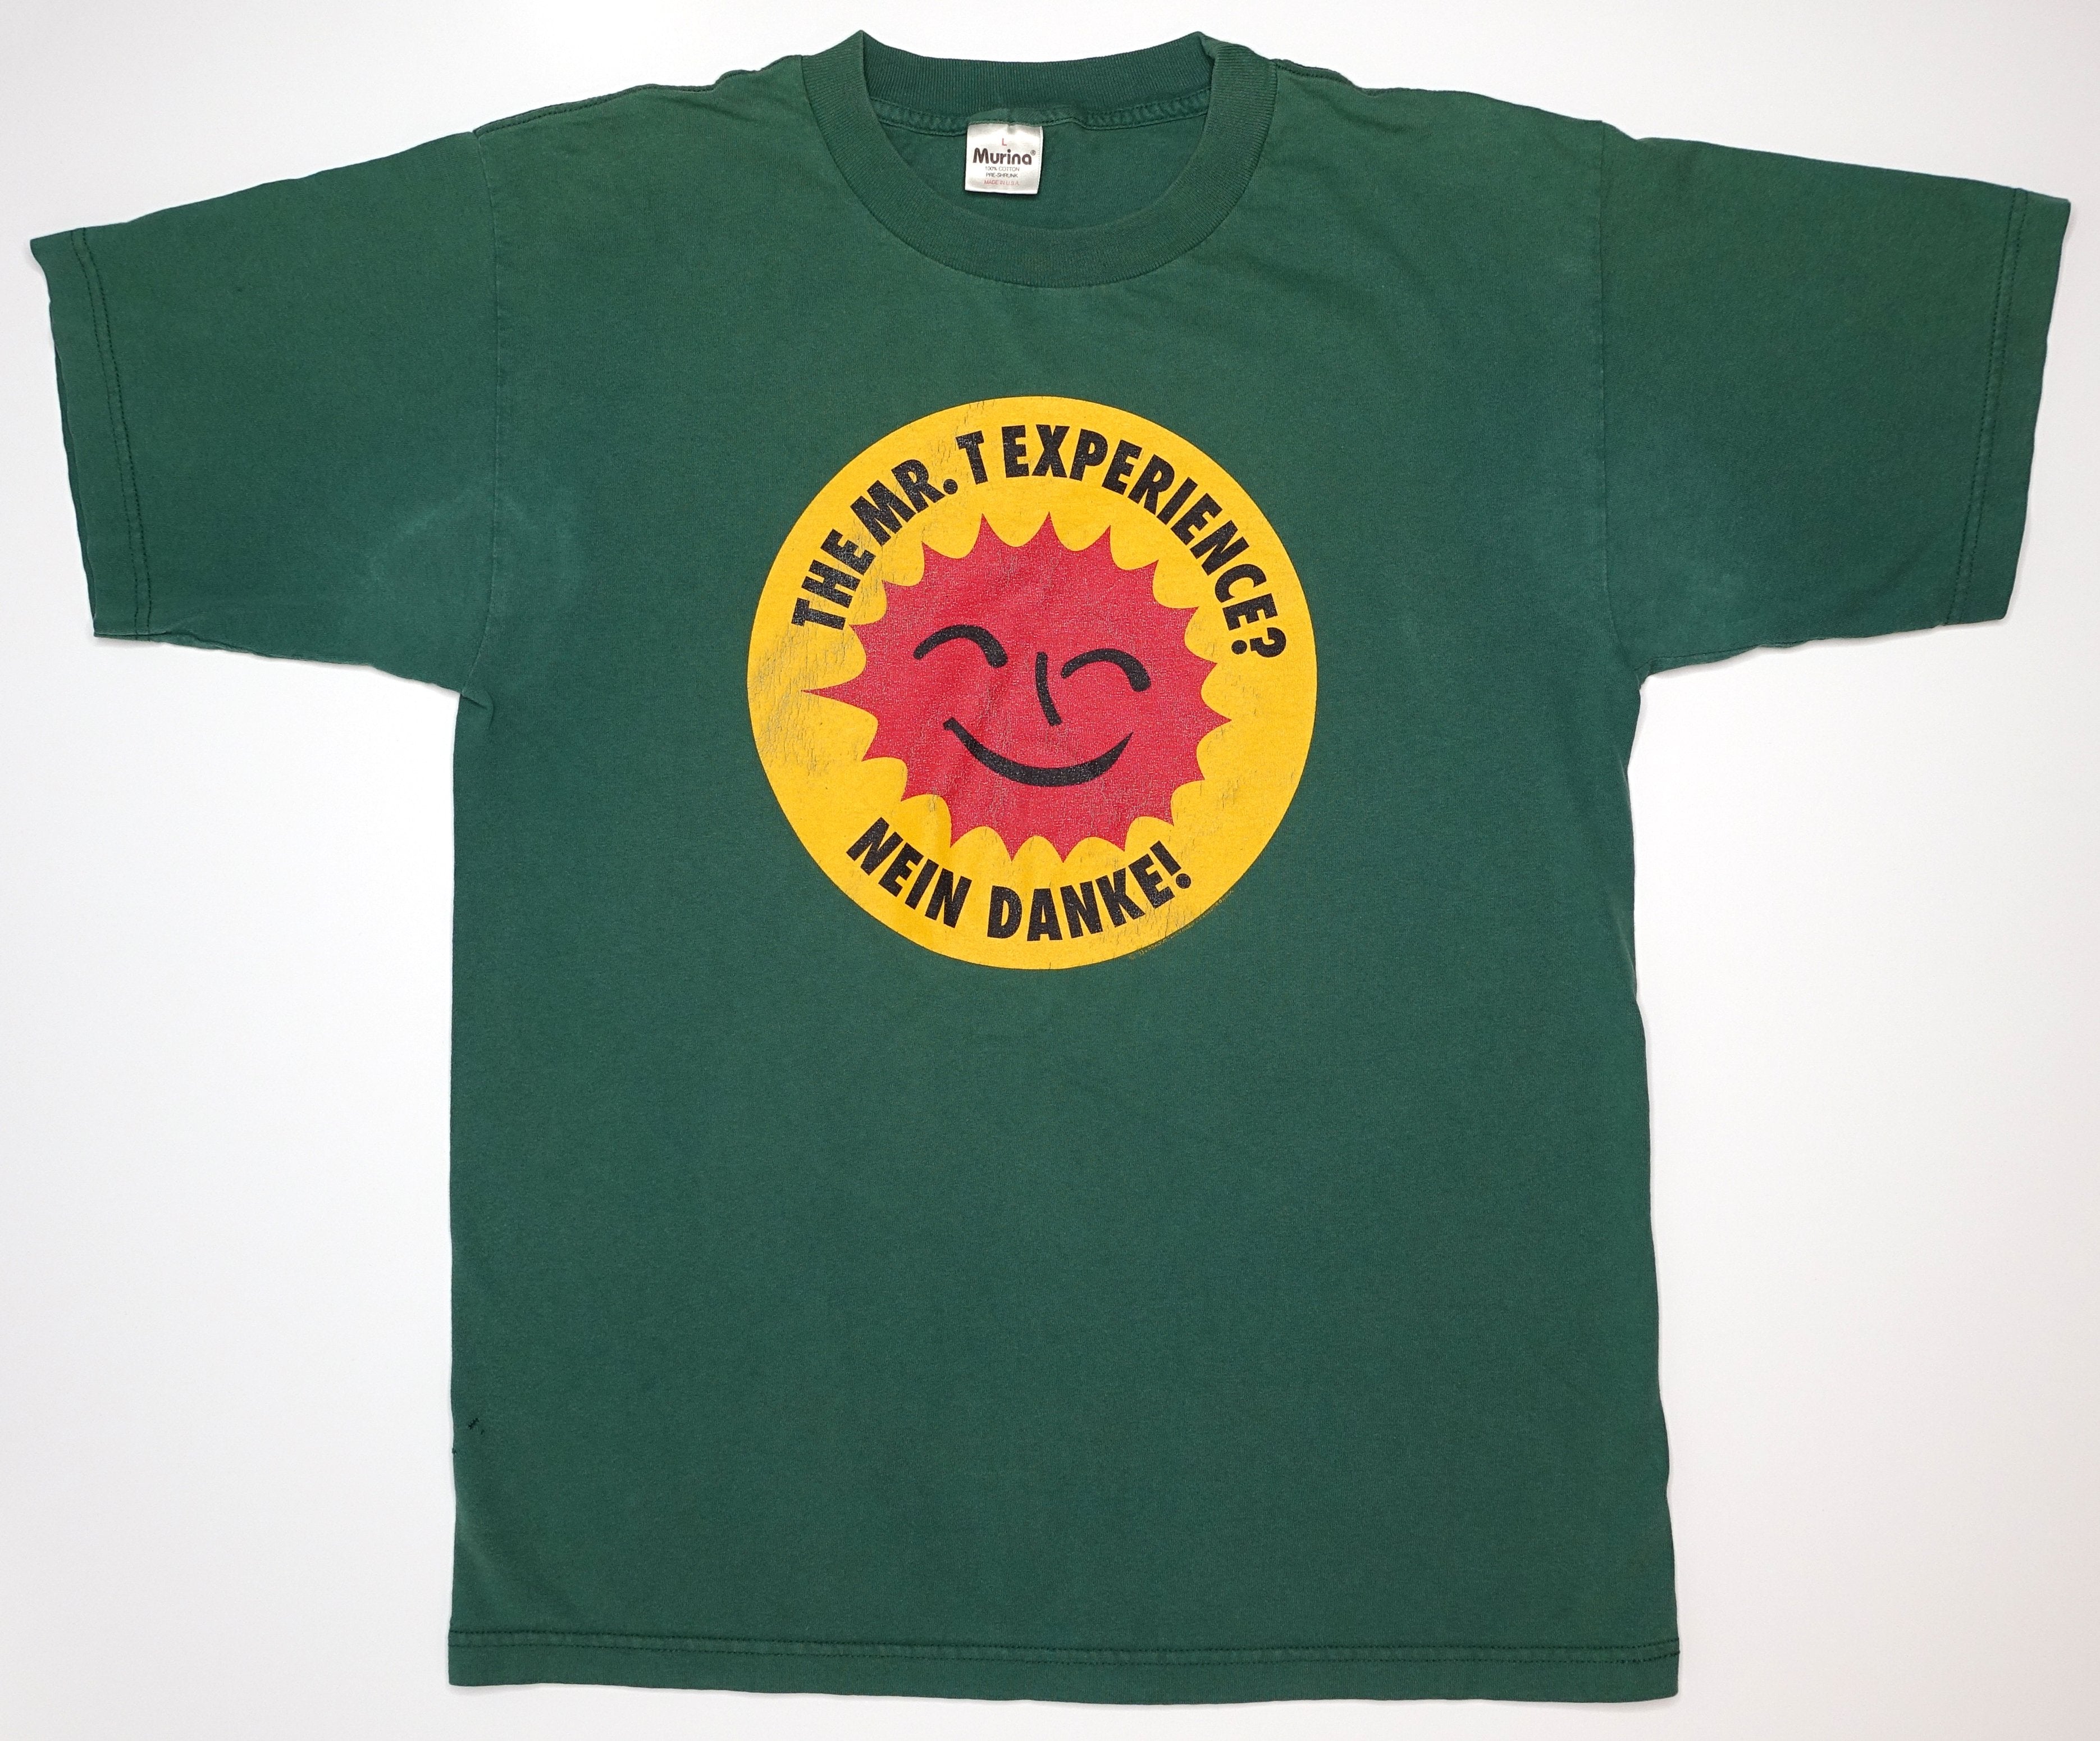 Mr. T Experience ‎– Nein Danke! / Our Bodies Our Selves Tour 90's GREEN Shirt Size Large